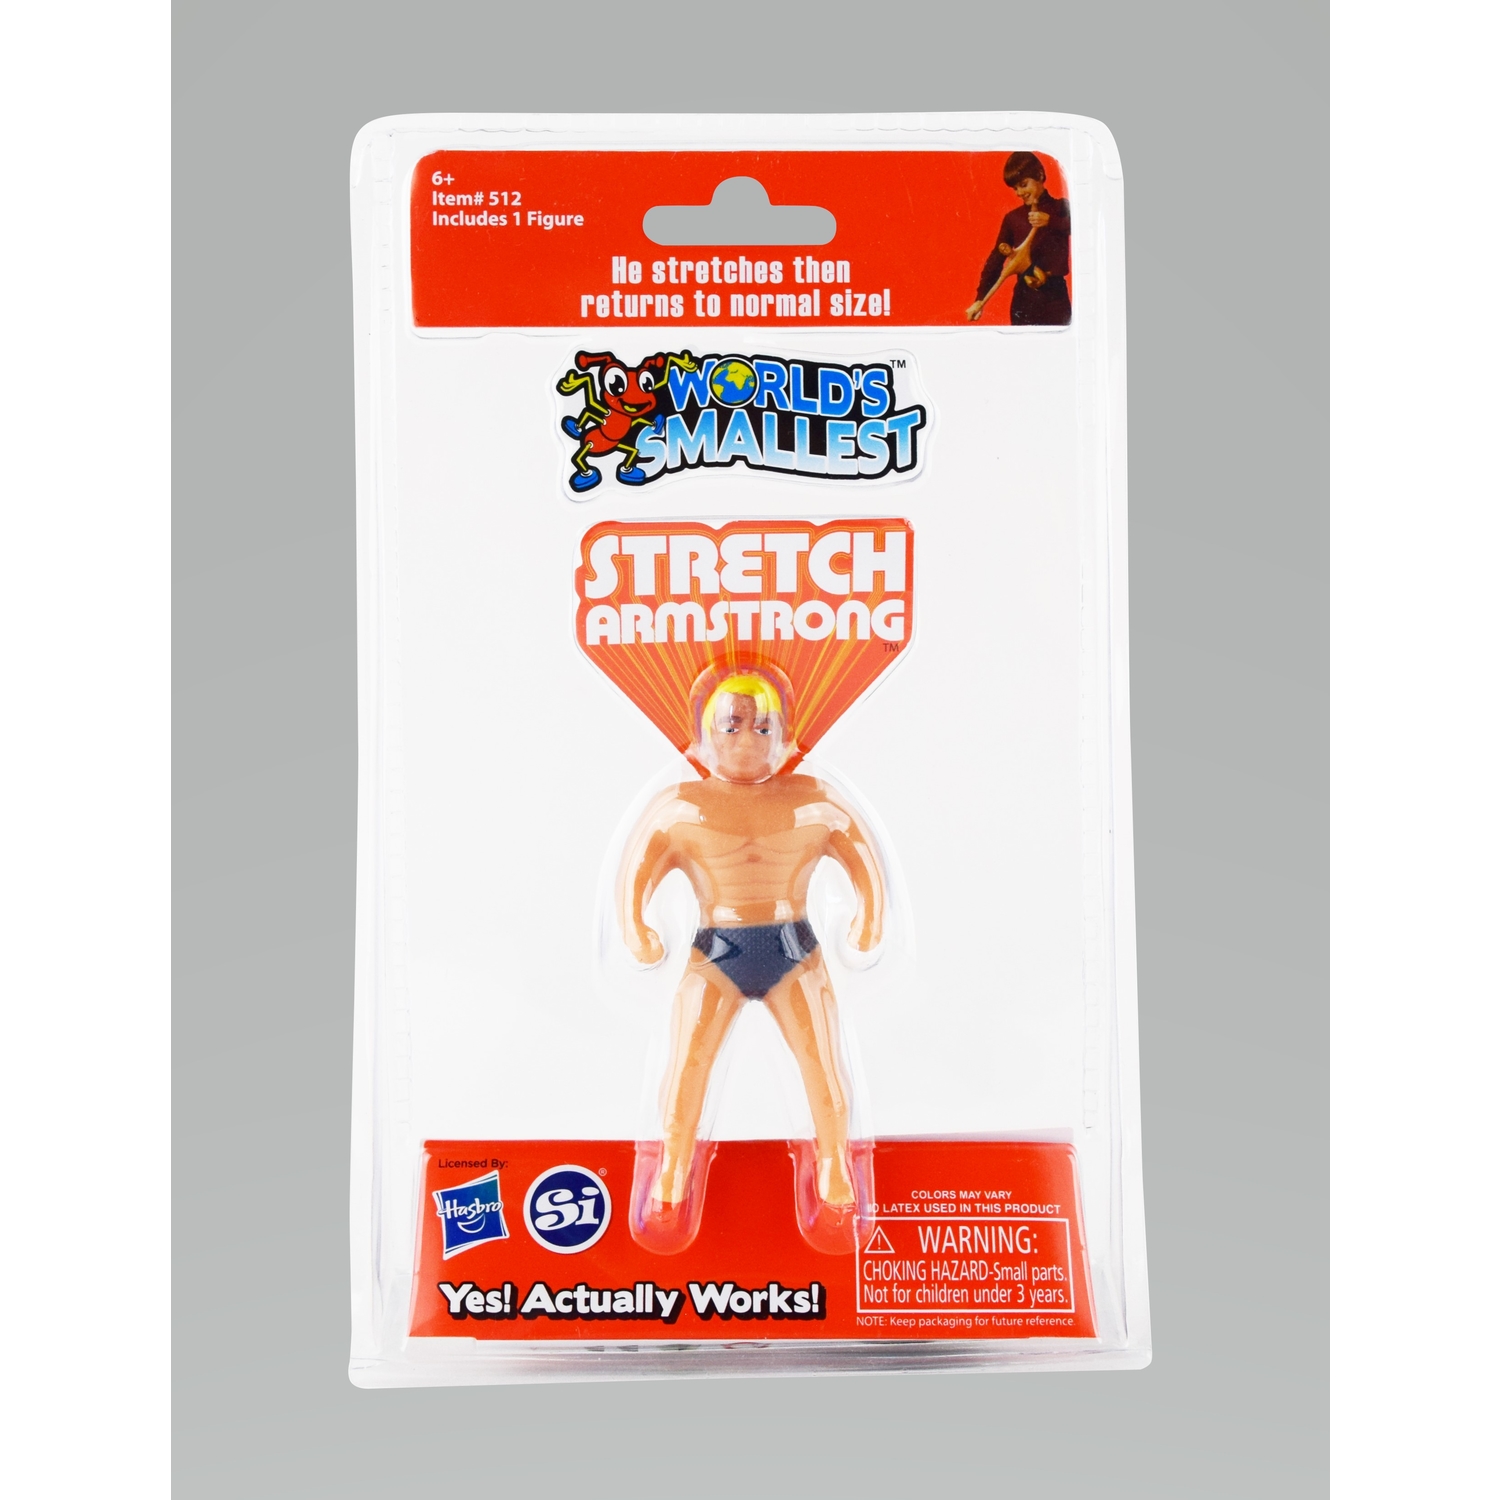 super stretch armstrong